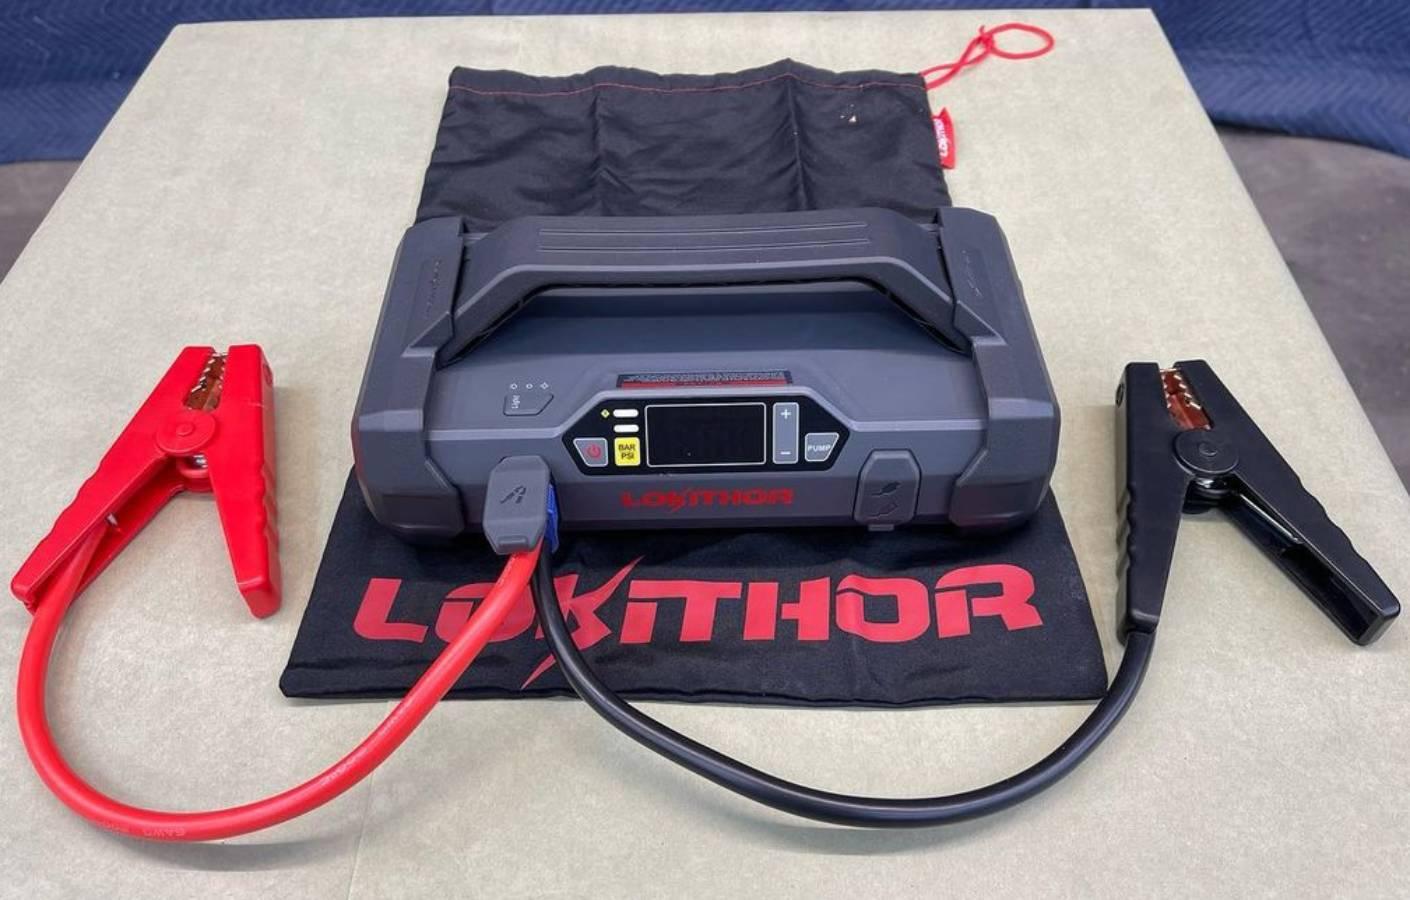 Different between car emergency starter power and rechargeable battery - Lokithorshop